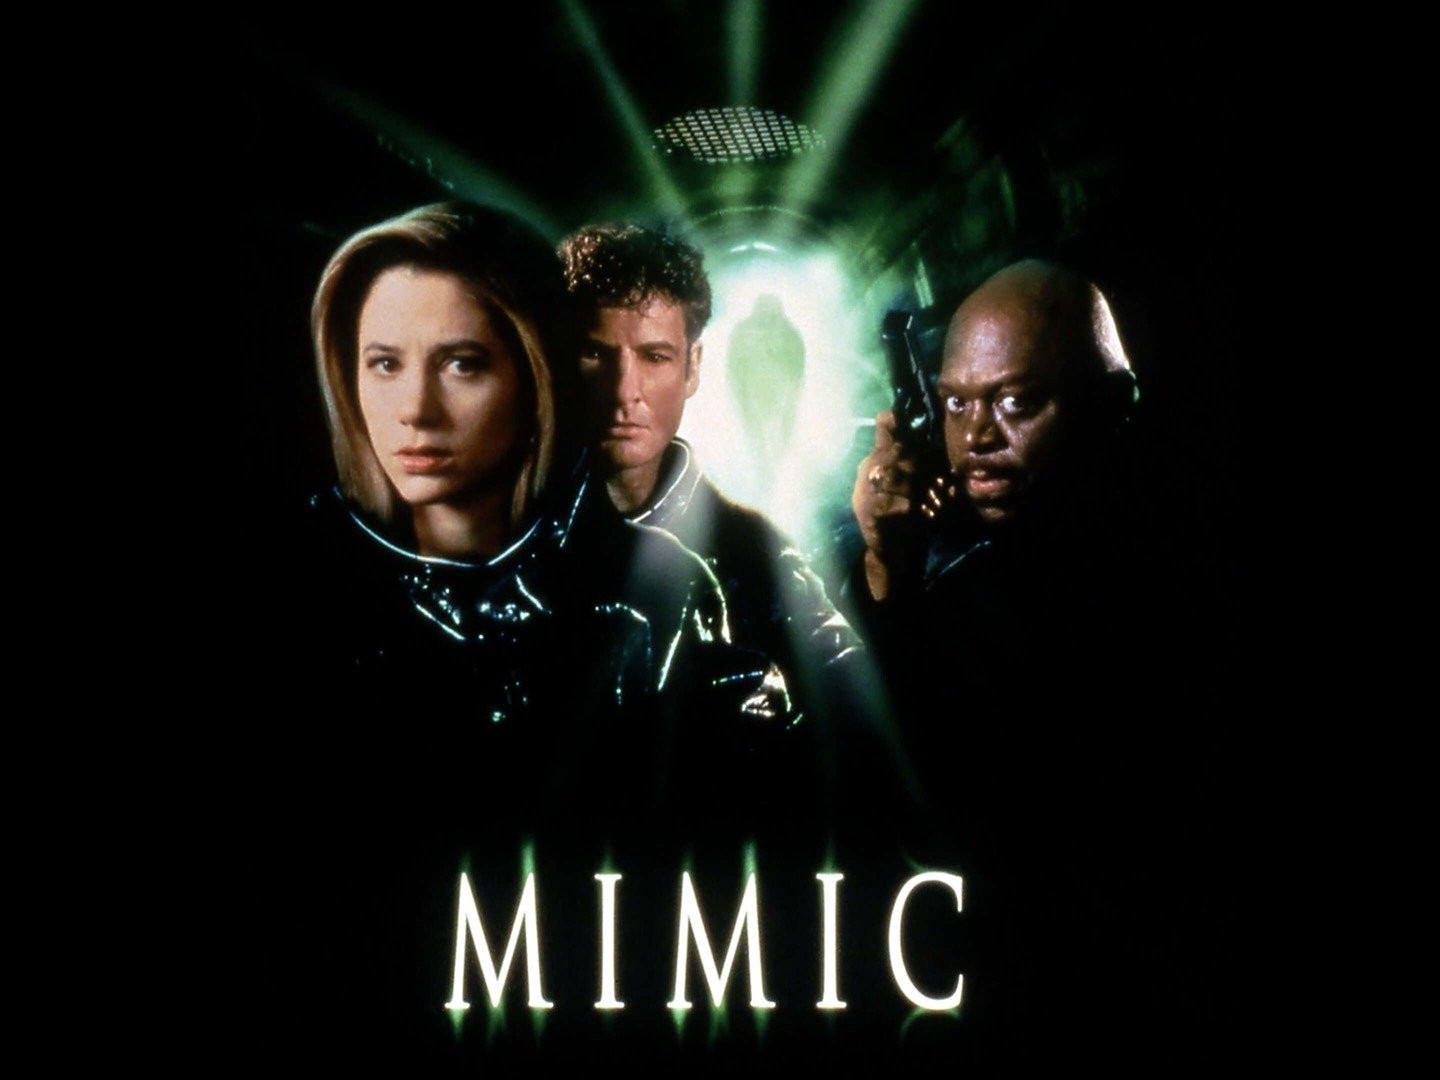 The Mimic - Movies on Google Play